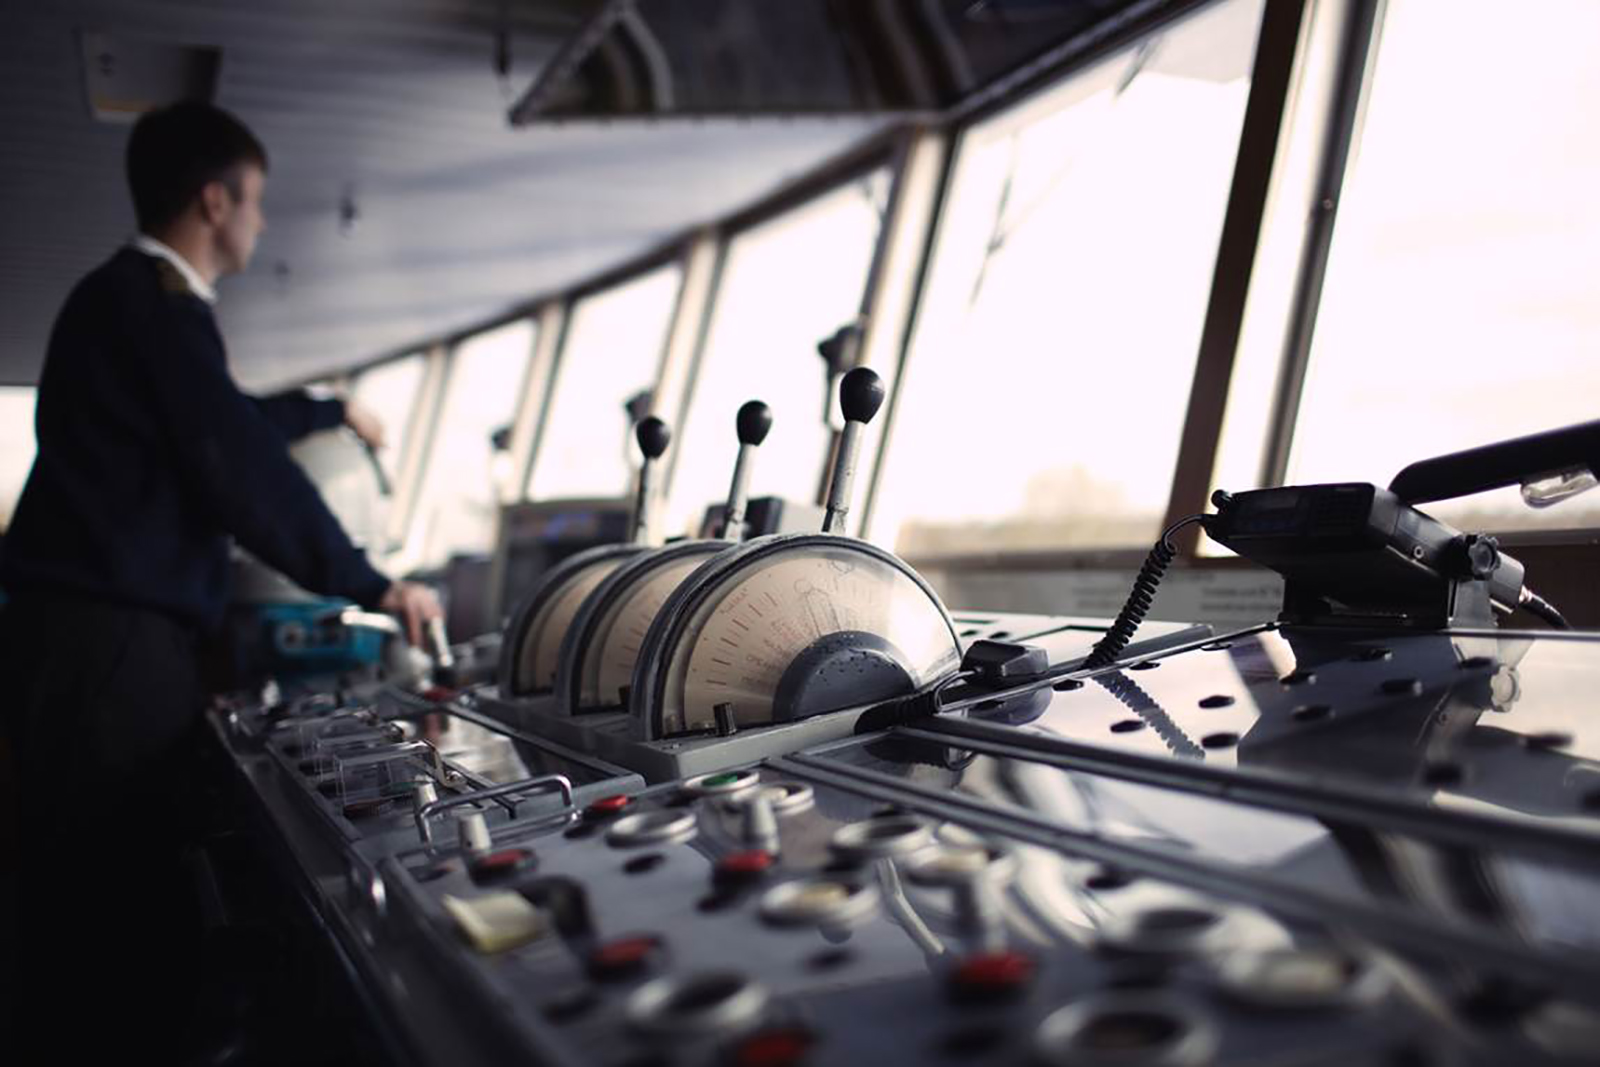 ... while the captain looks at the navigational situation from the bridge. The CyClaDes project developed concepts to improve the communication between two control centers onboard (Bridge and Engine Control Room).